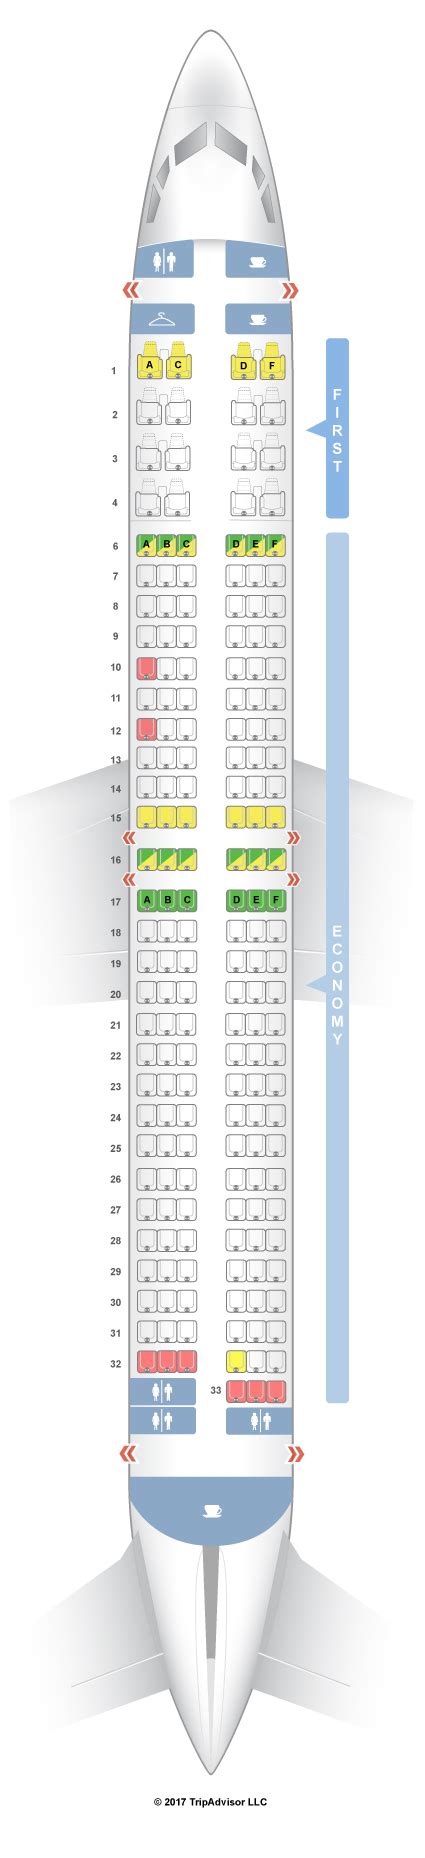 For your next Alaska Airlines flight, use this seating chart to get the most comfortable seats, ... Boeing 737-800 (738) Boeing 737-900 (739). 